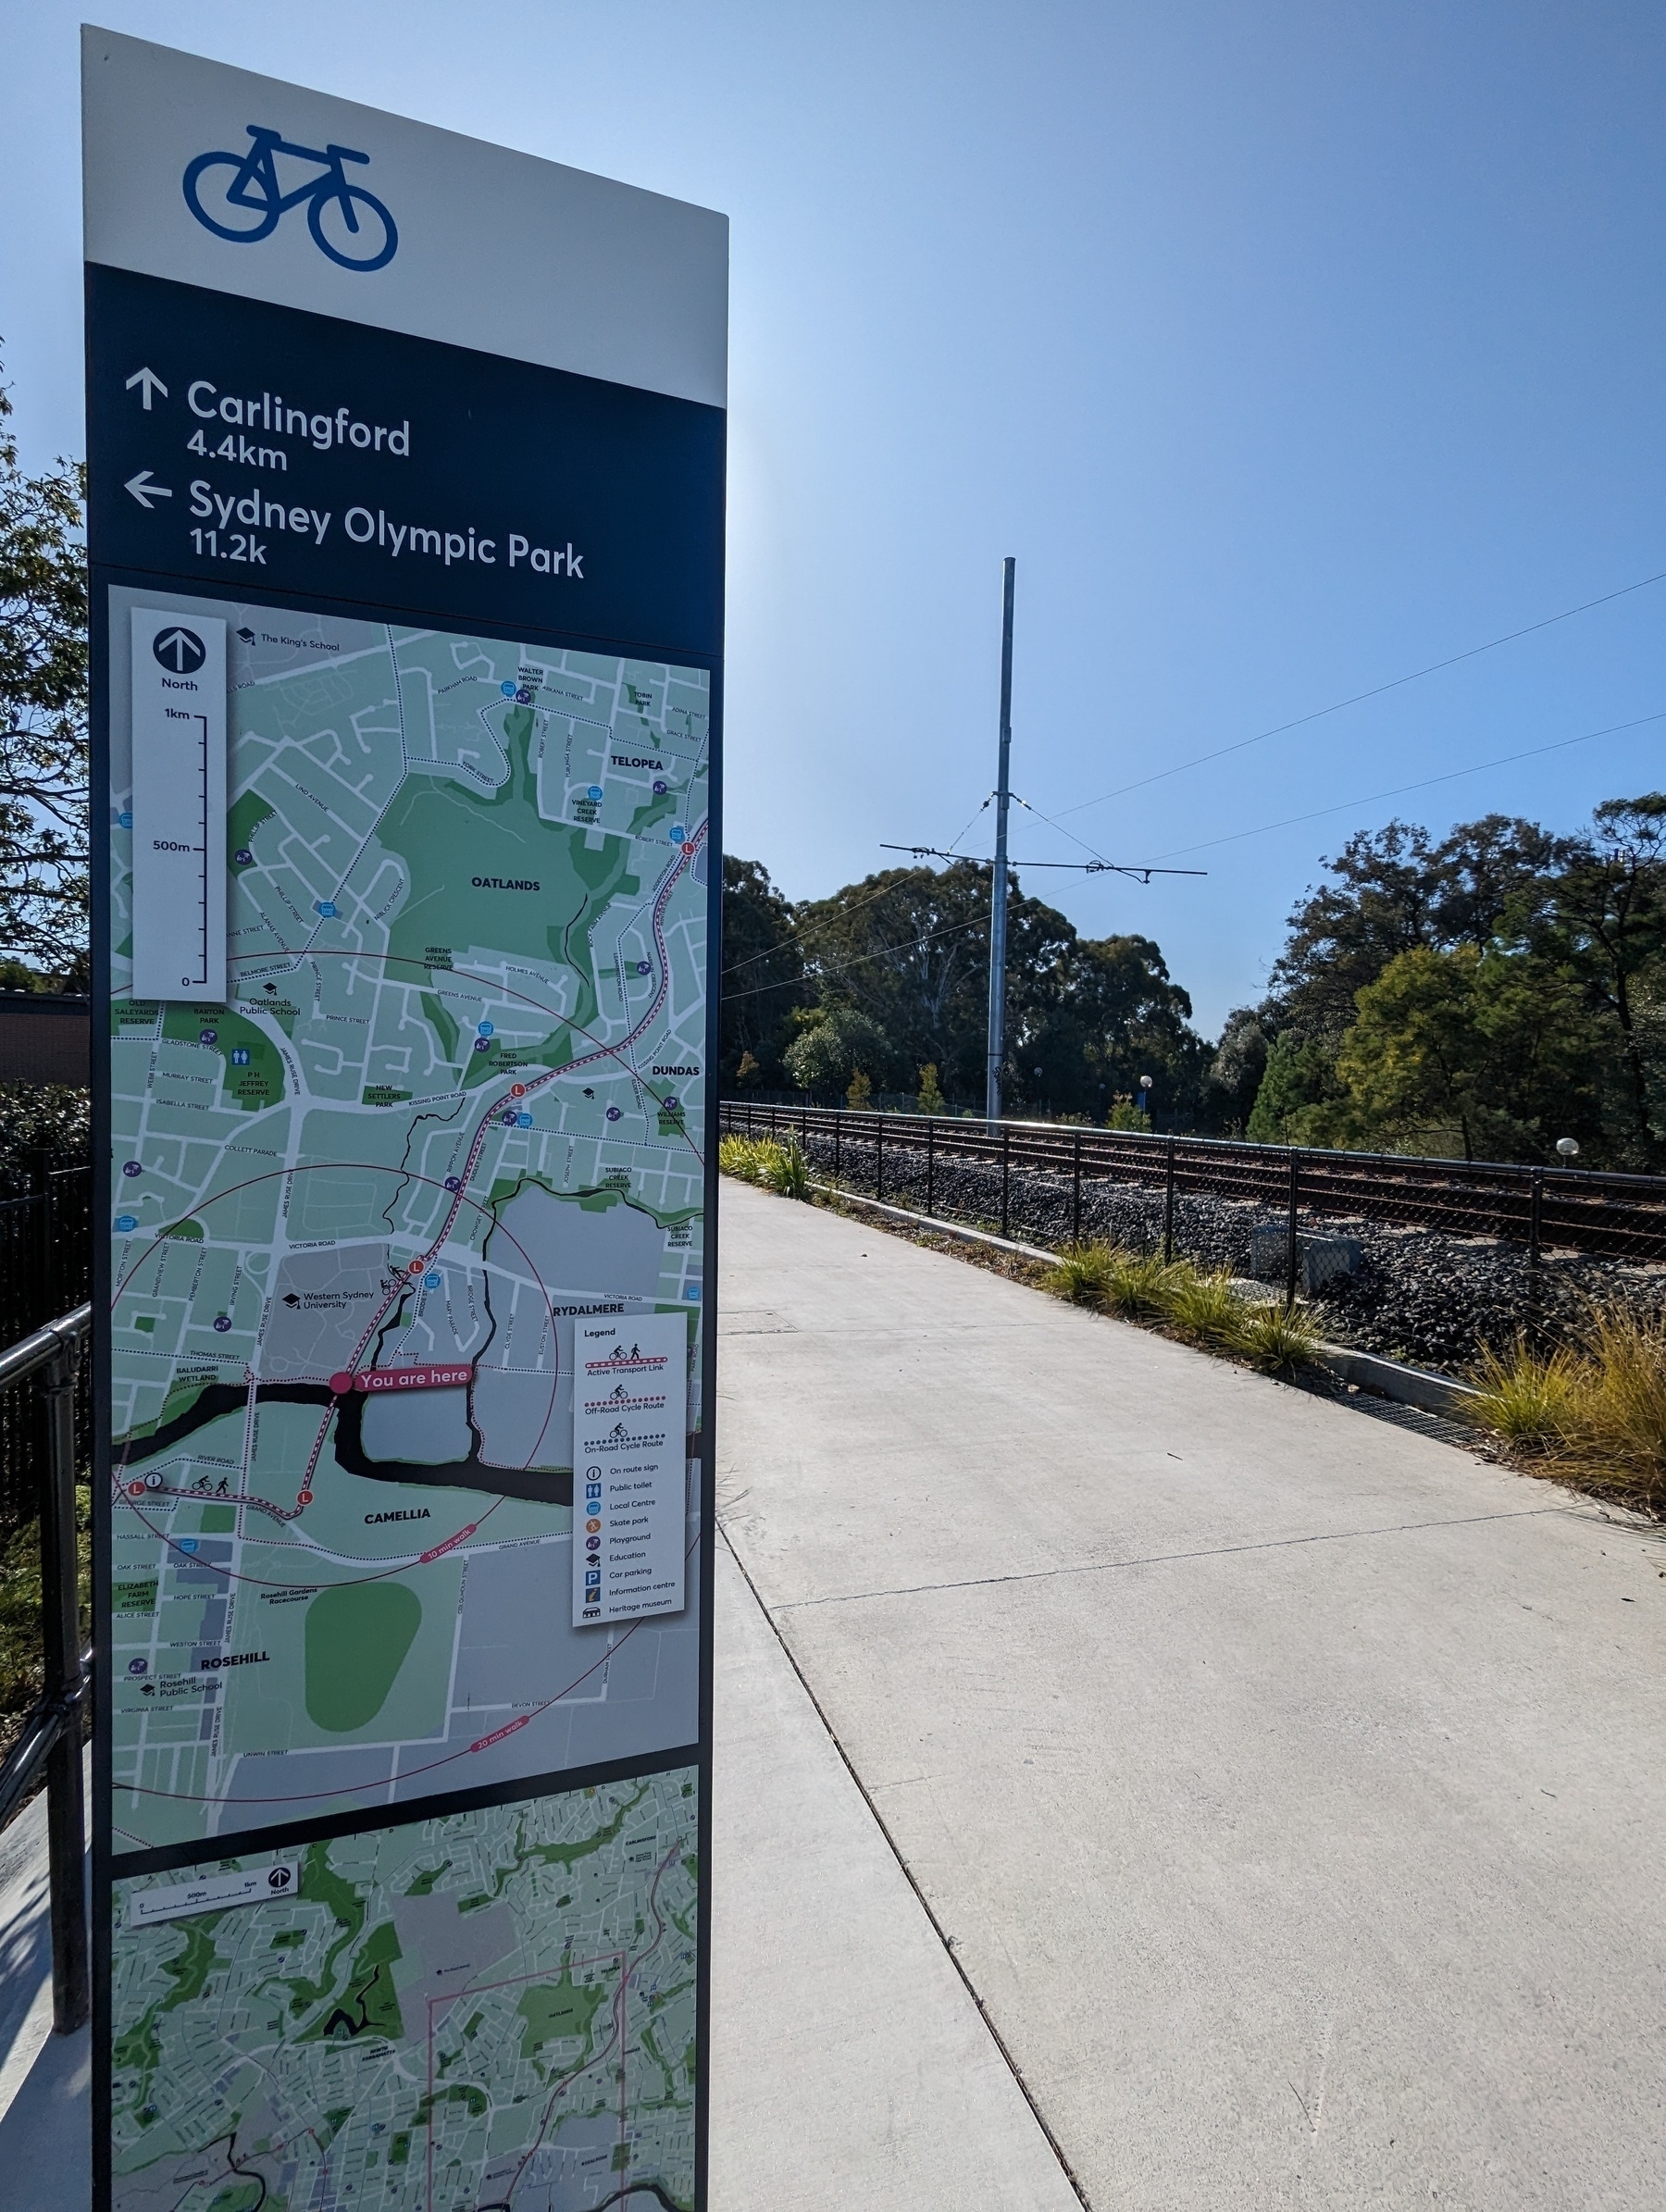 A wayfinding sign at the start of the brand new Rydalmere to Carlingford bike path. In the background is the new light rail line, due to open in 2024.